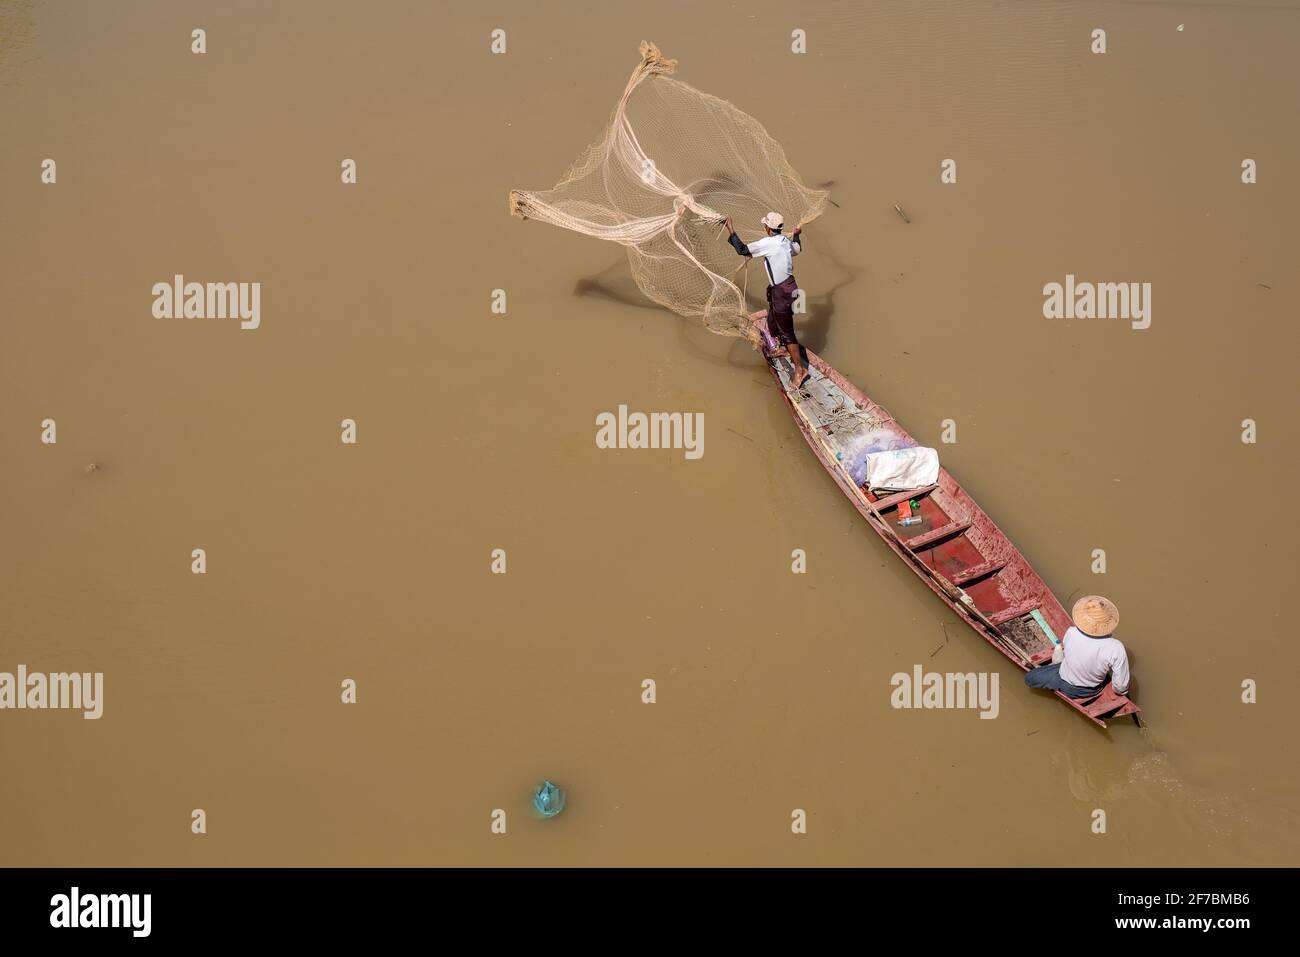 A fisherman casts his nets in the water of the Bago River, Bago, Myanmar Stock Photo